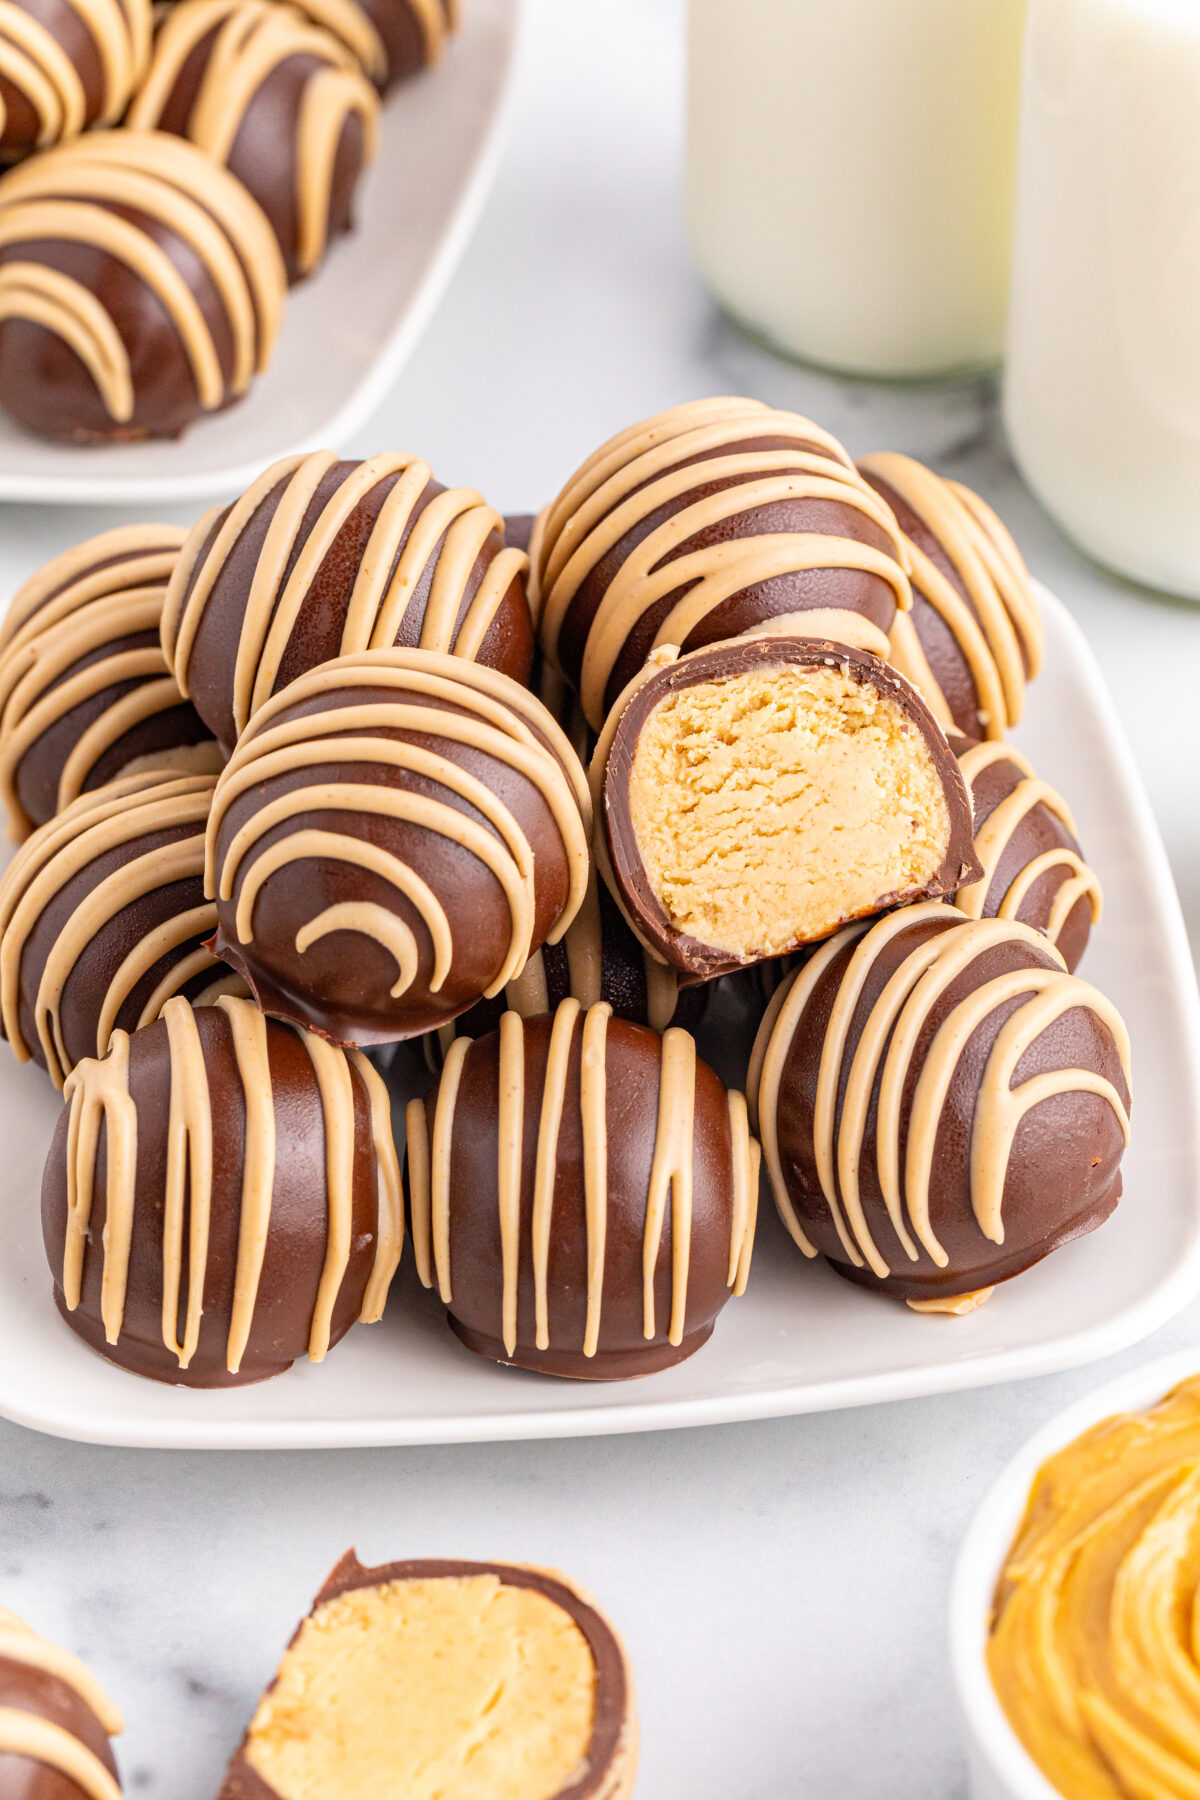 Indulge in the perfect combination of creamy peanut butter and rich chocolate with these irresistible chocolate covered peanut butter balls.